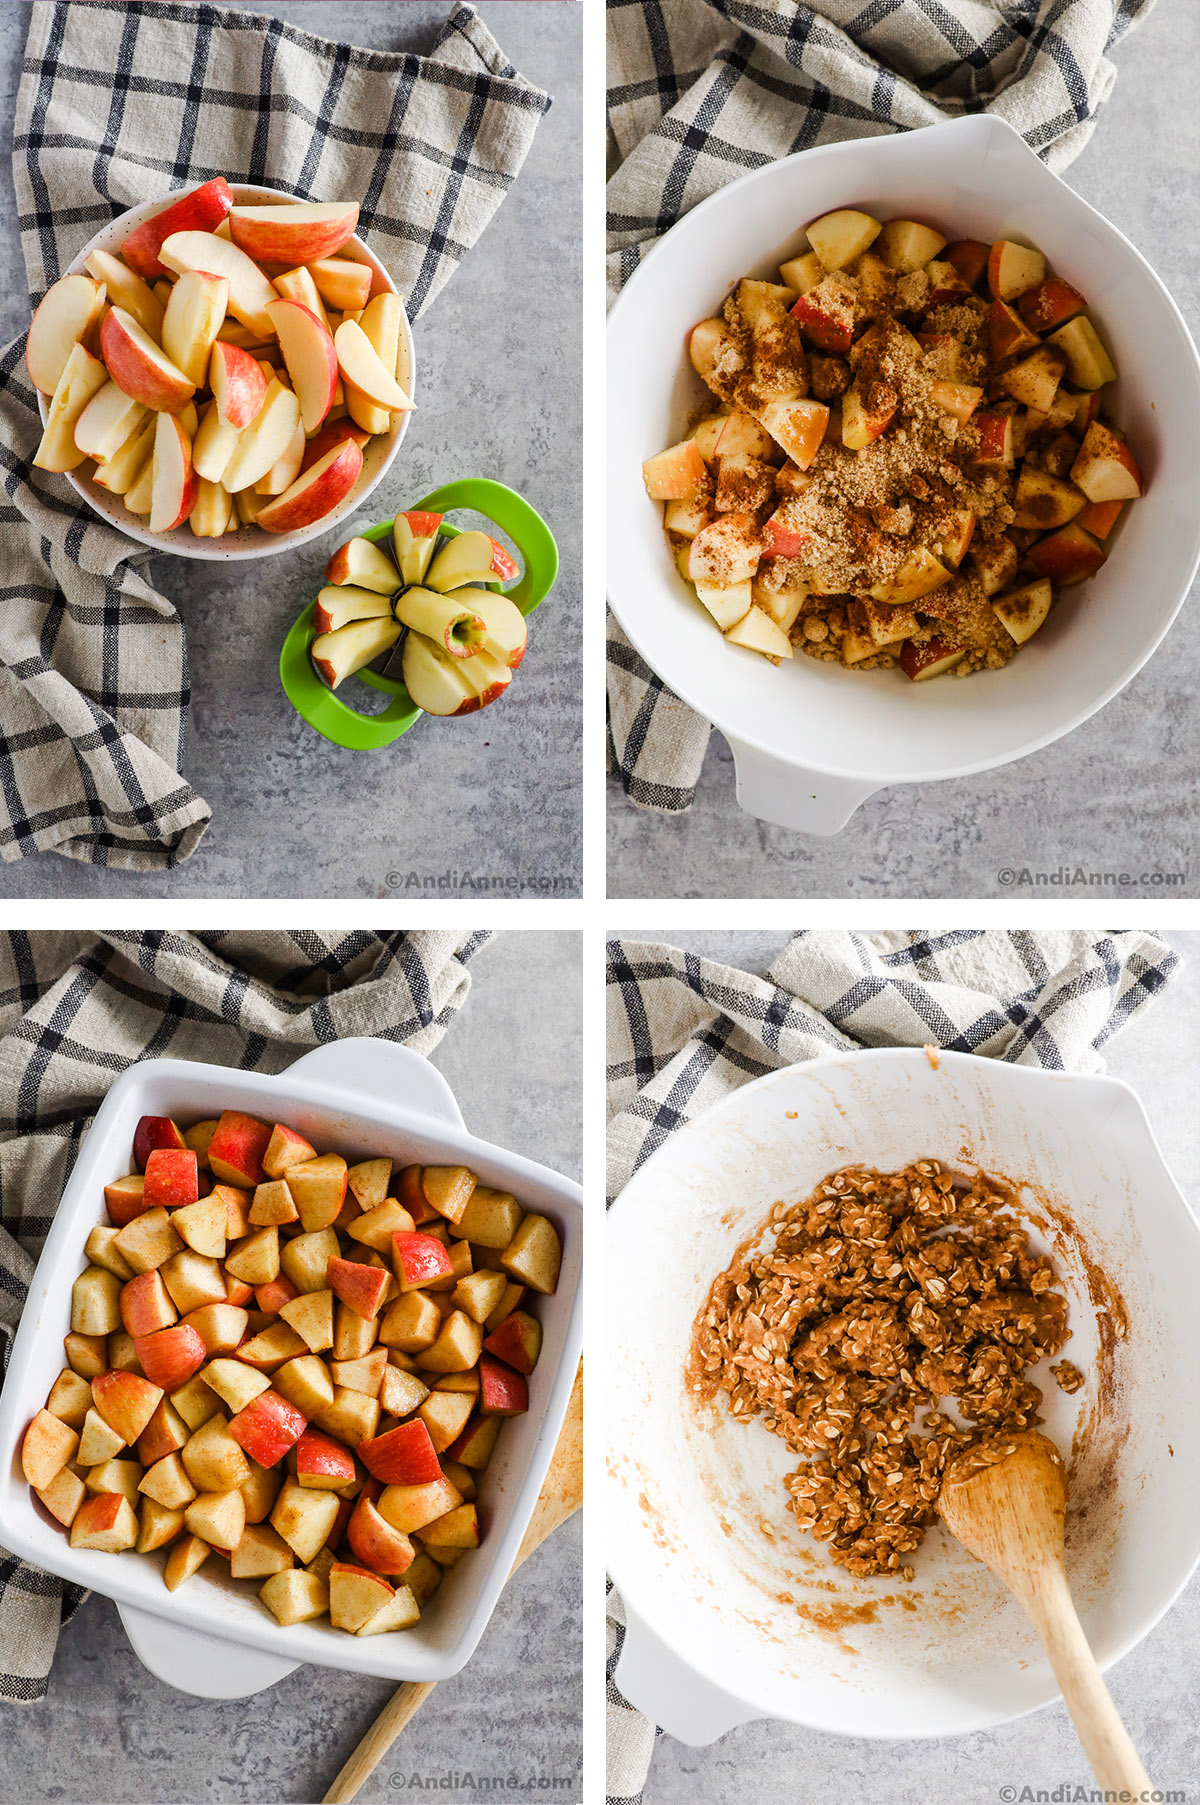 Four images showing steps to make recipe. First is sliced apples in a bowl and an apple slicer. Second is chopped apples in a bowl with sugar and spices dumped on top. Third is chopped apple with spices in a white baking dish. Fourth is a large bowl with oat mixture inside and a wood spoon.